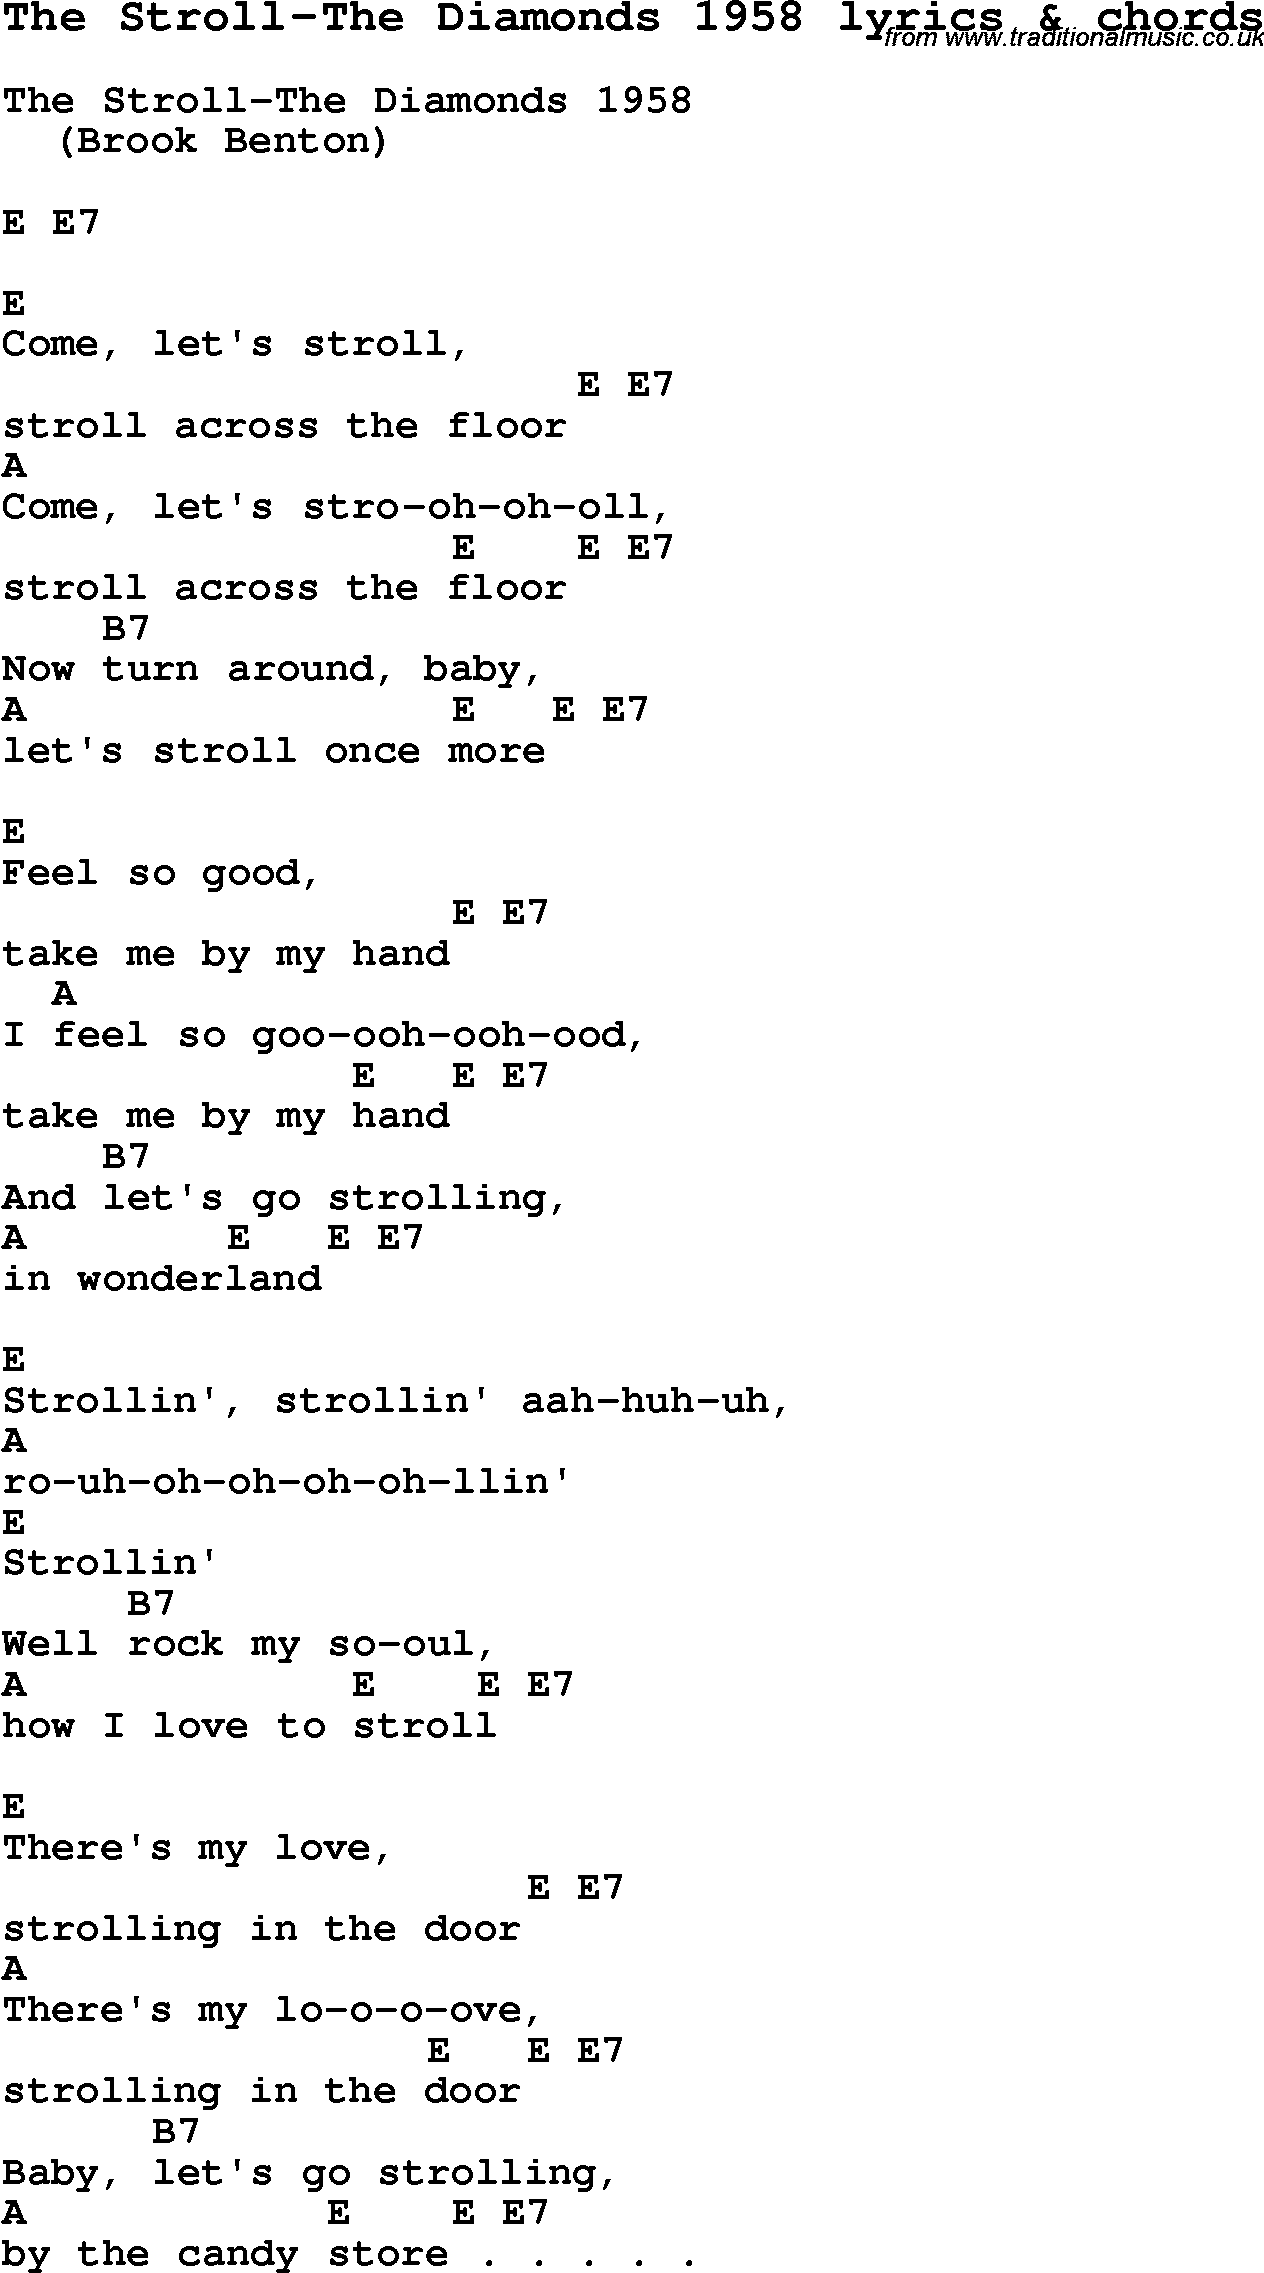 Love Song Lyrics for:The Stroll-The Diamonds 1958 with chords.
